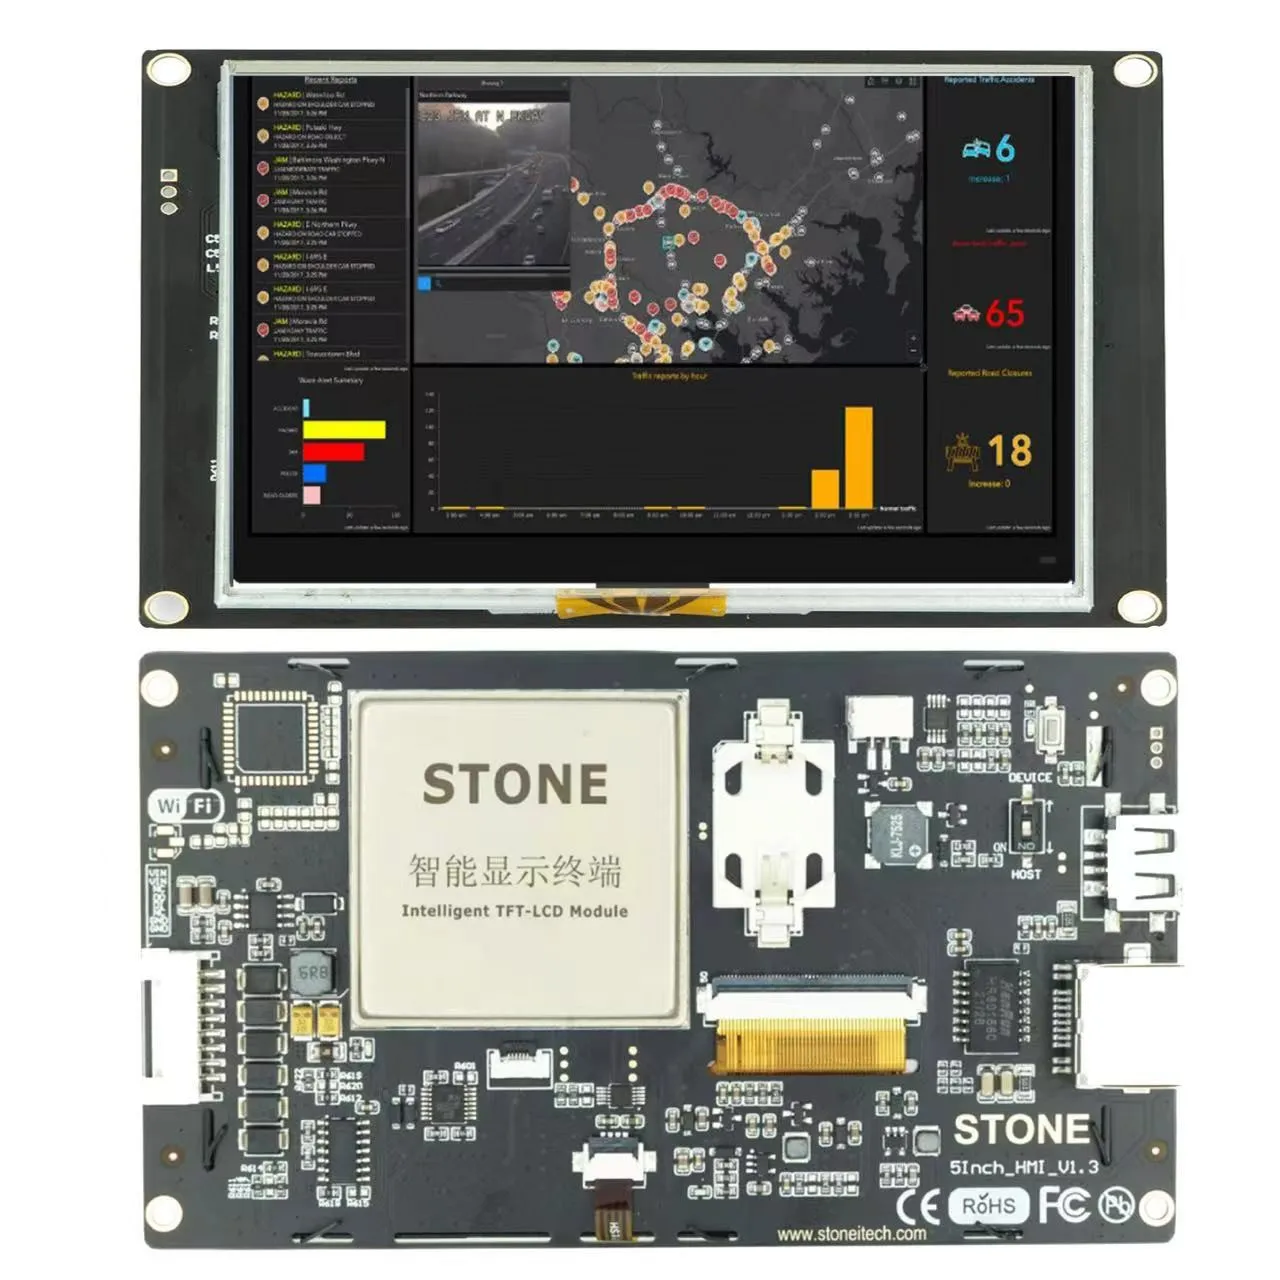 5.0 TFT LCD Industry Series Screen & 4-wire resistance touch panel, 256MB of flash memory for HMI projects